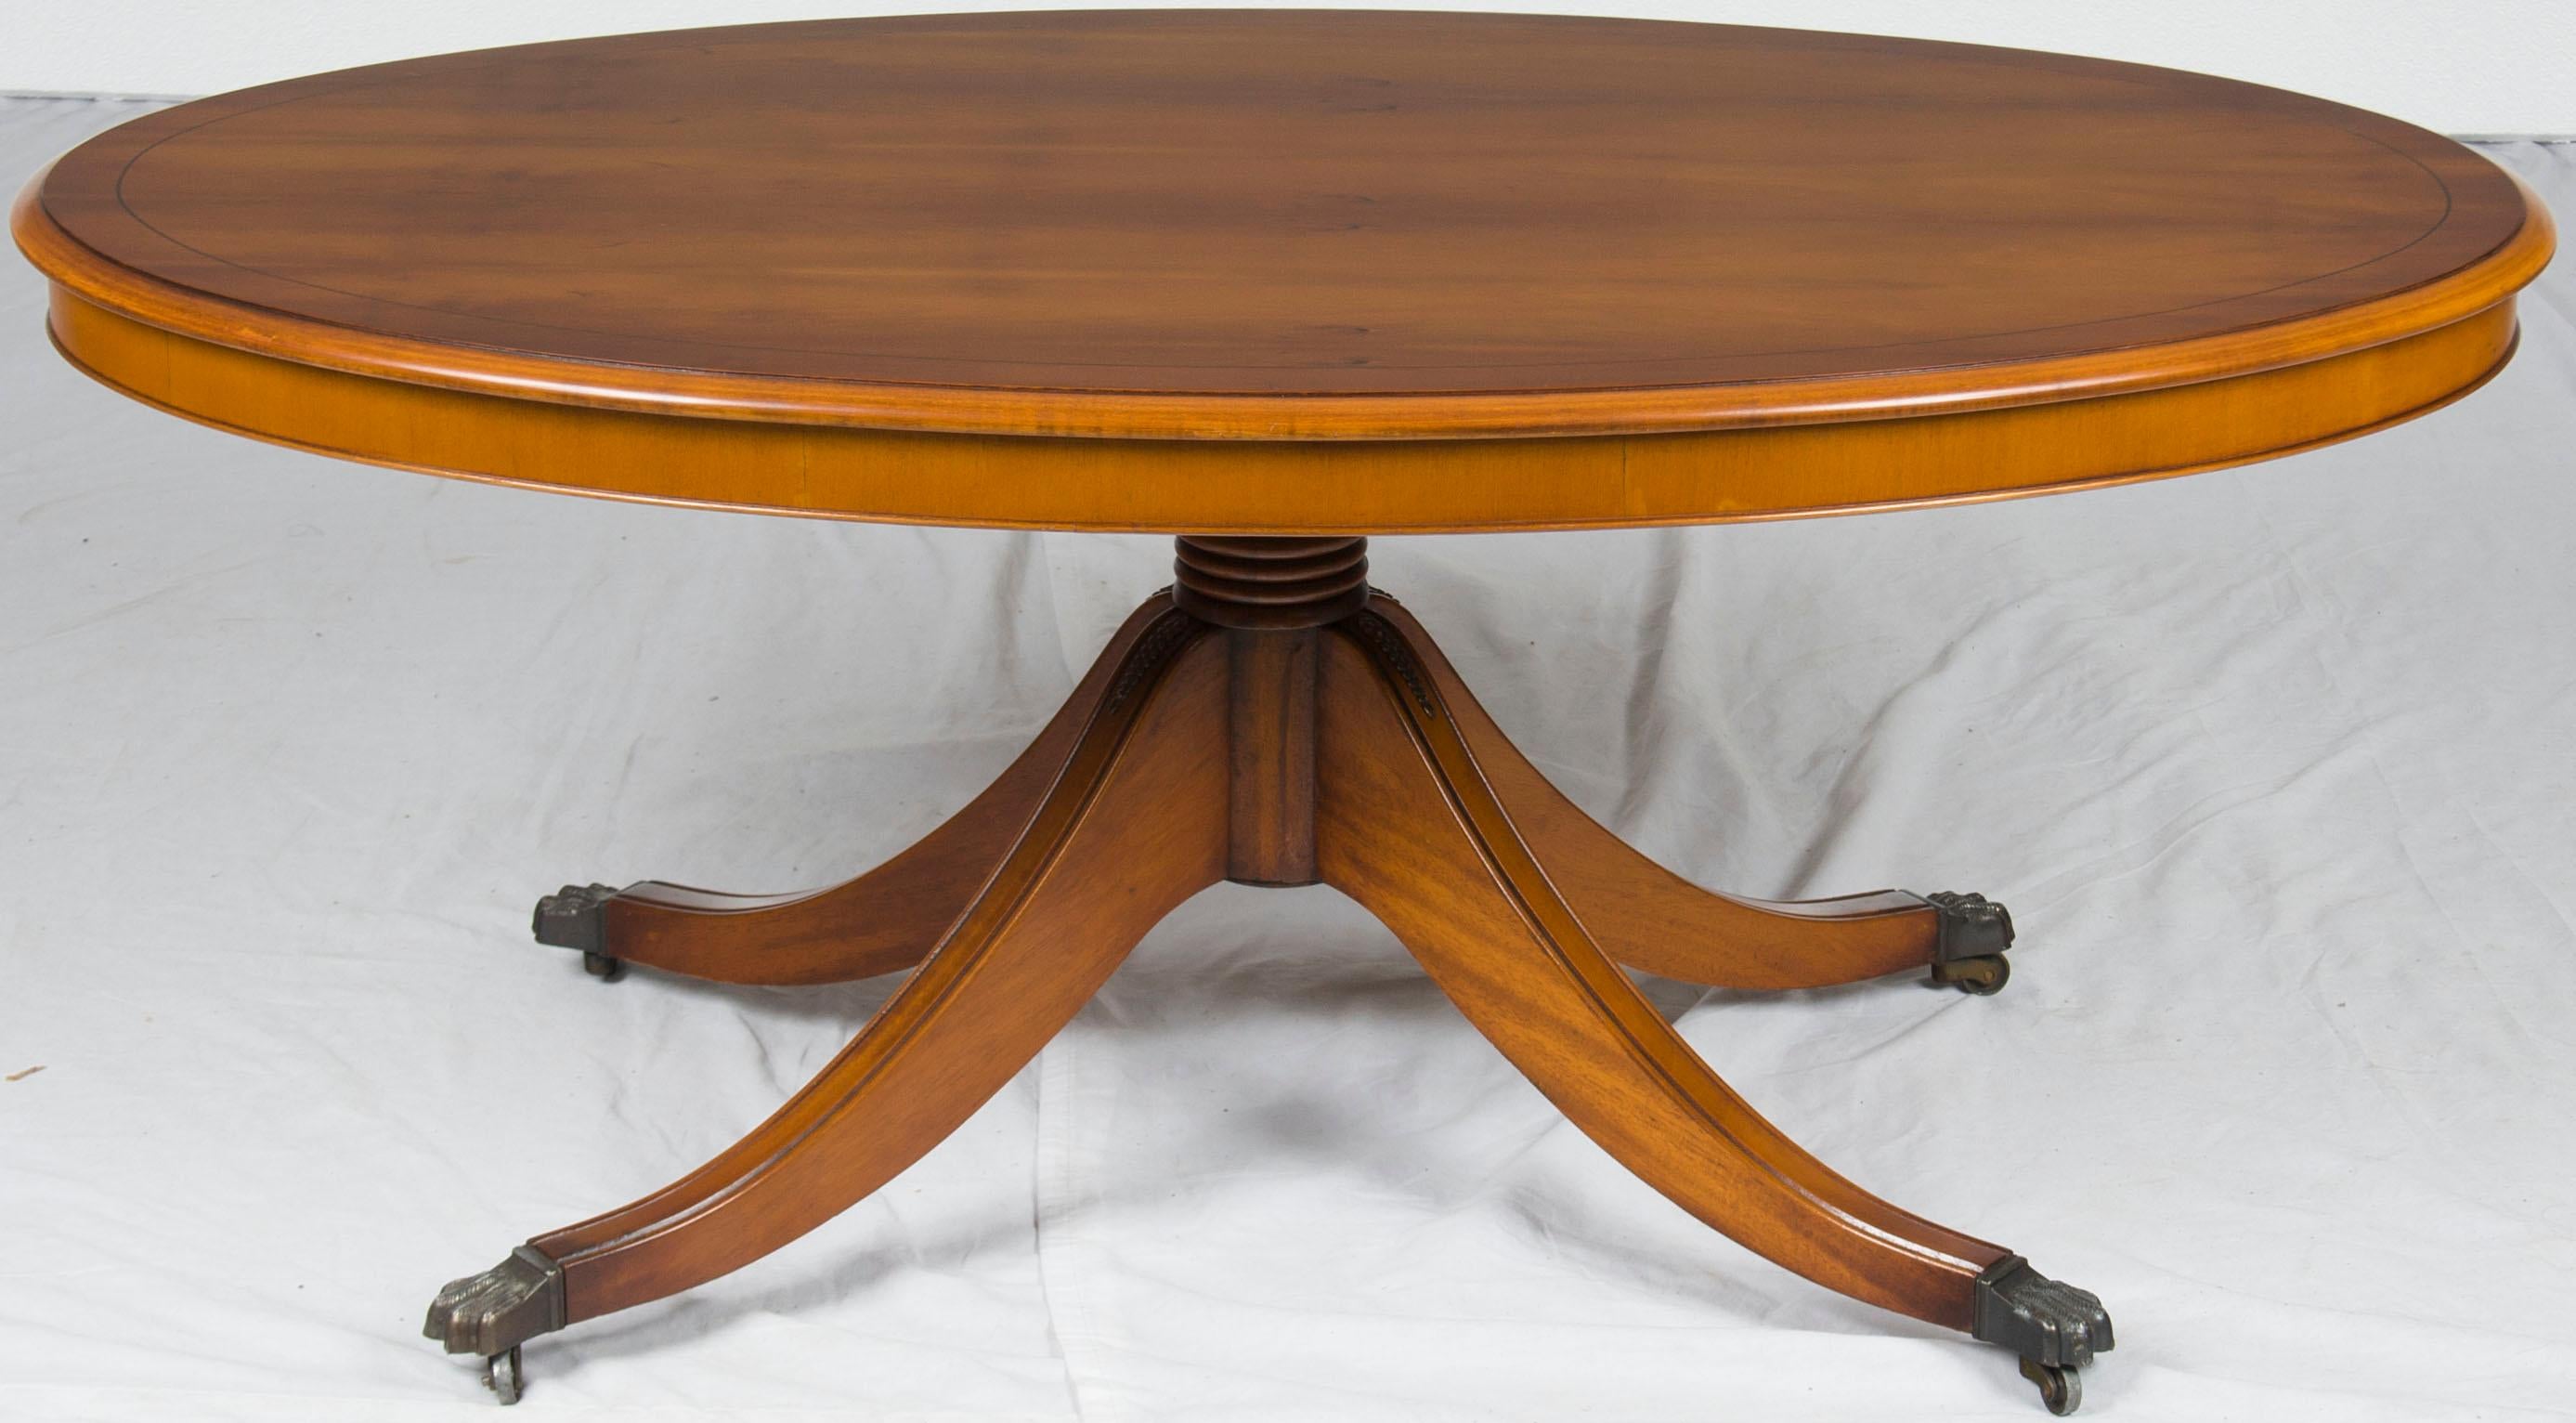 This antique oval coffee table was crafted in England around the year 1960. The rich yew would complement any setting, while the table itself remains very sturdy and in good overall condition.

The design elements used in this coffee table come